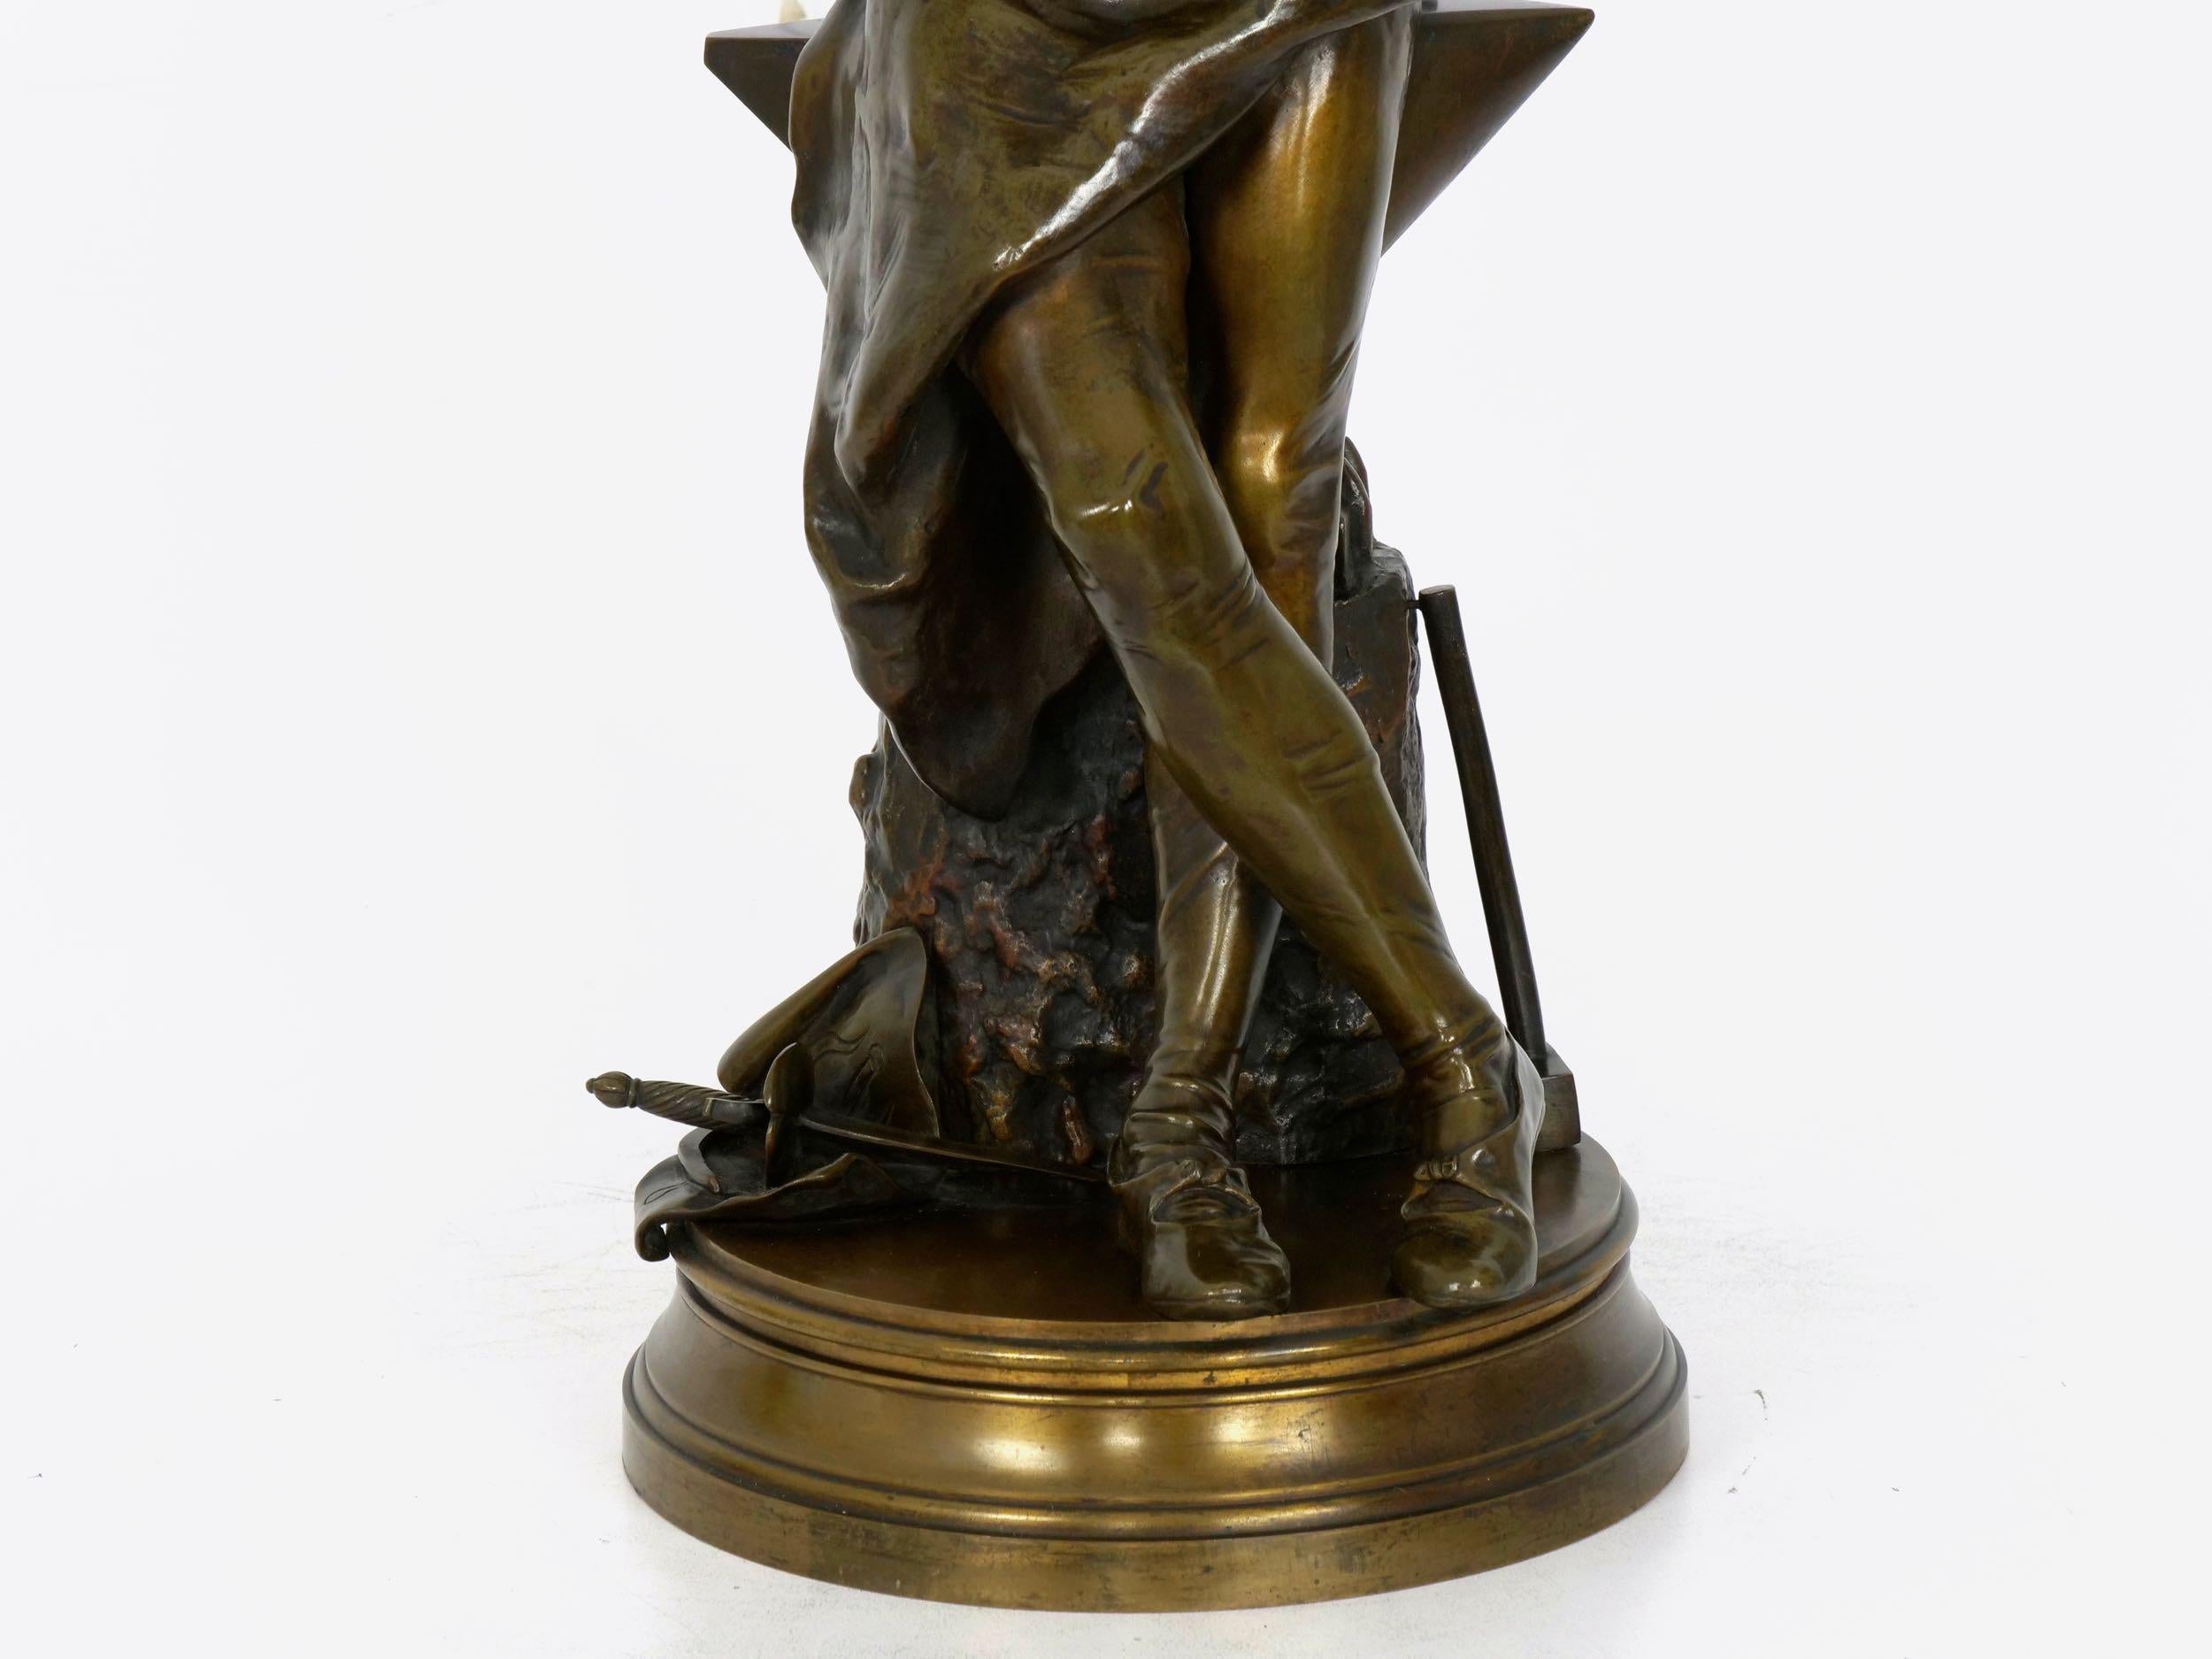 “A Young Bladesmith” French Antique Bronze Sculpture by Adrien-Étienne Gaudez 2